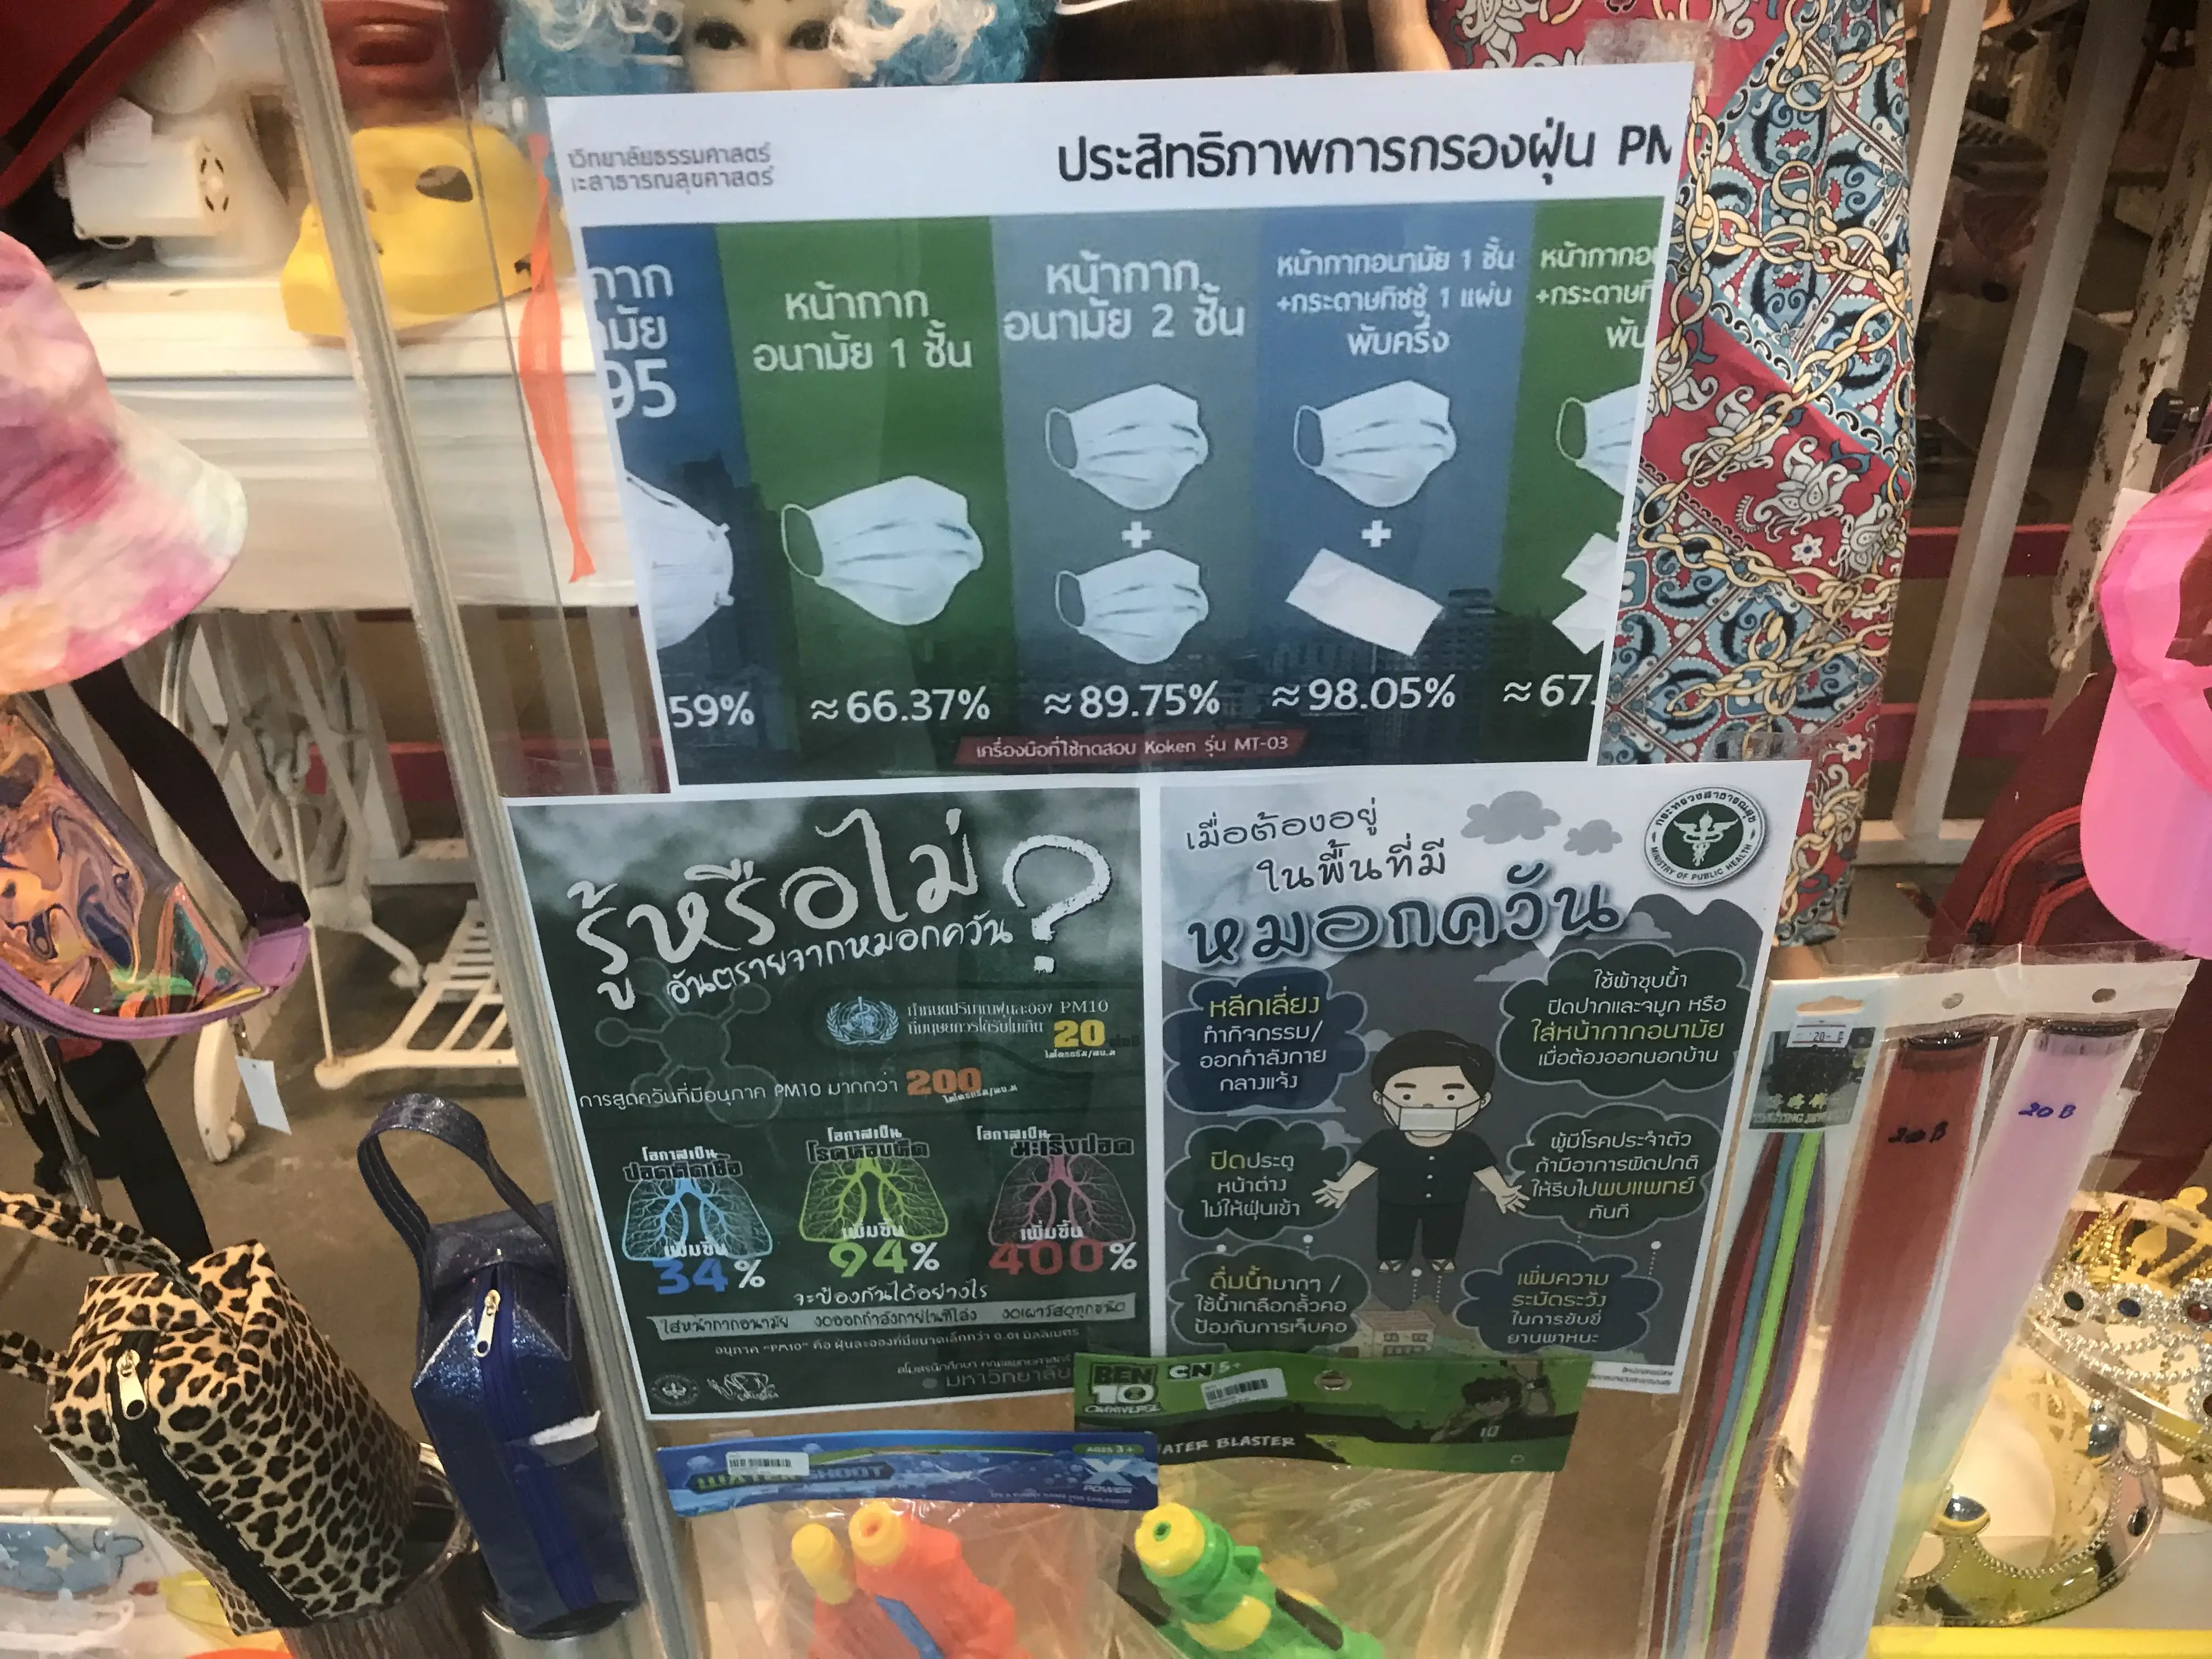 Public health posters and face masks in shop, Chiang Mai